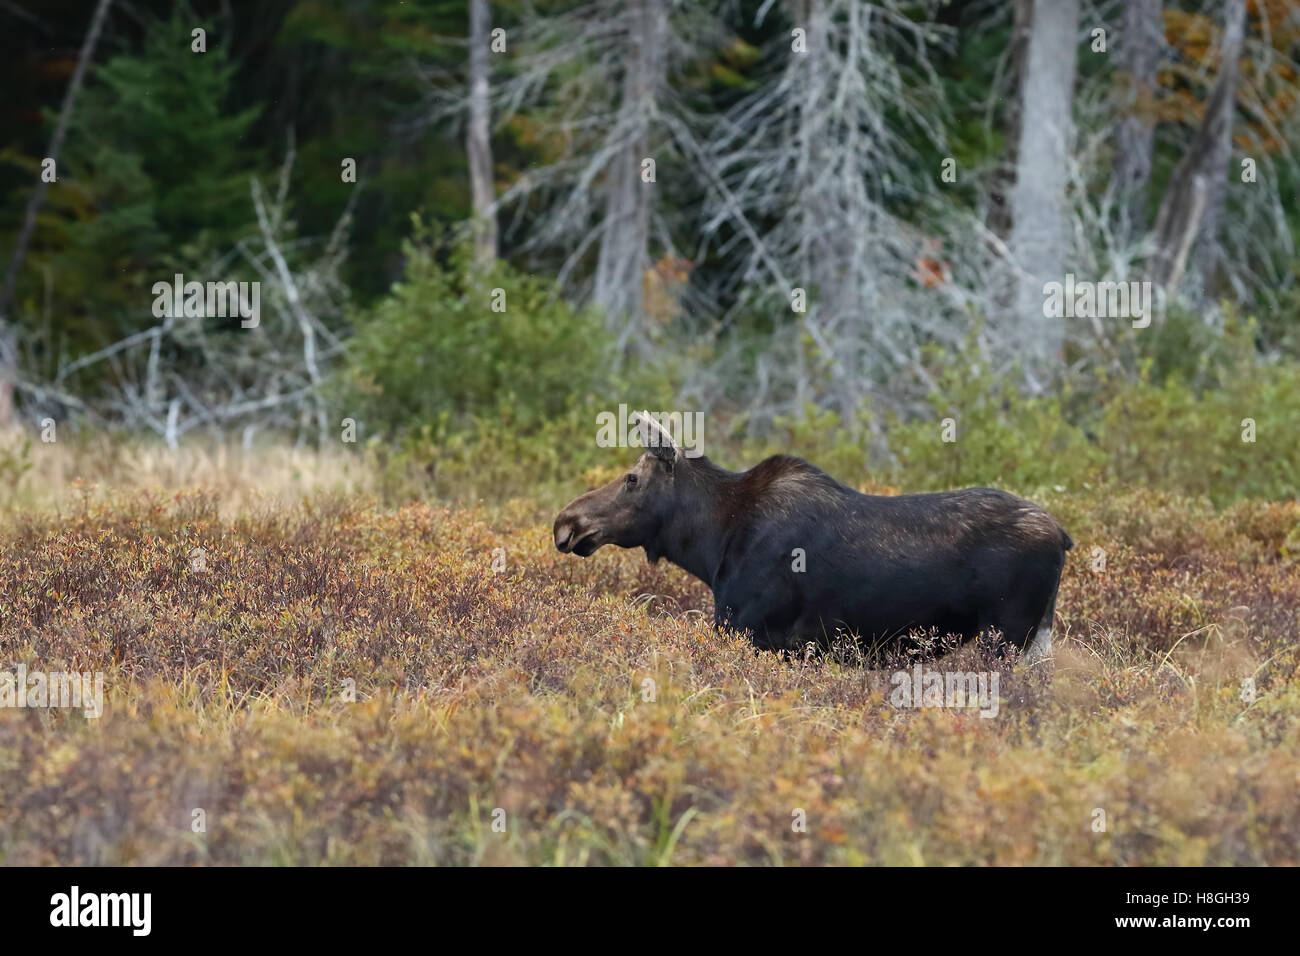 A cow moose (Alces alces) strolling through a field in Algonquin Park in Canada Stock Photo